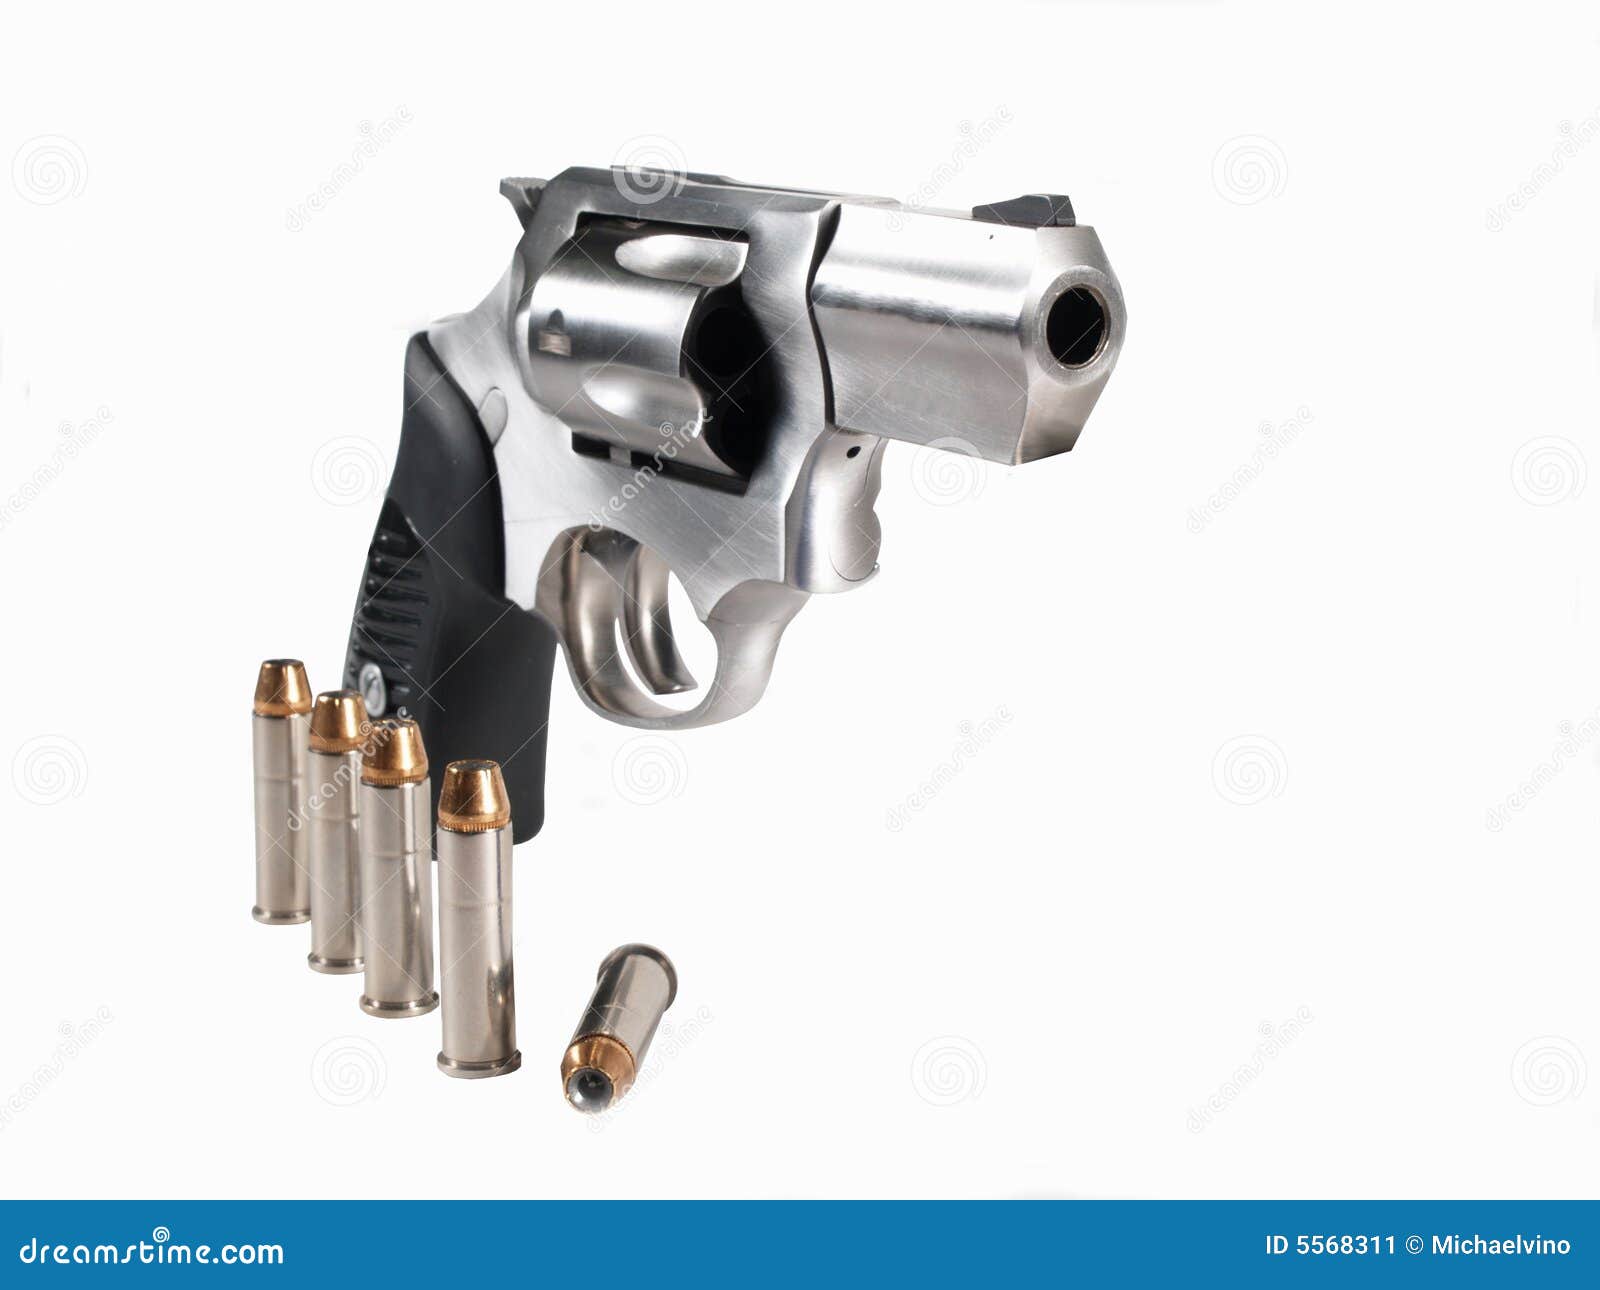 .357 magnum revolver with bullets